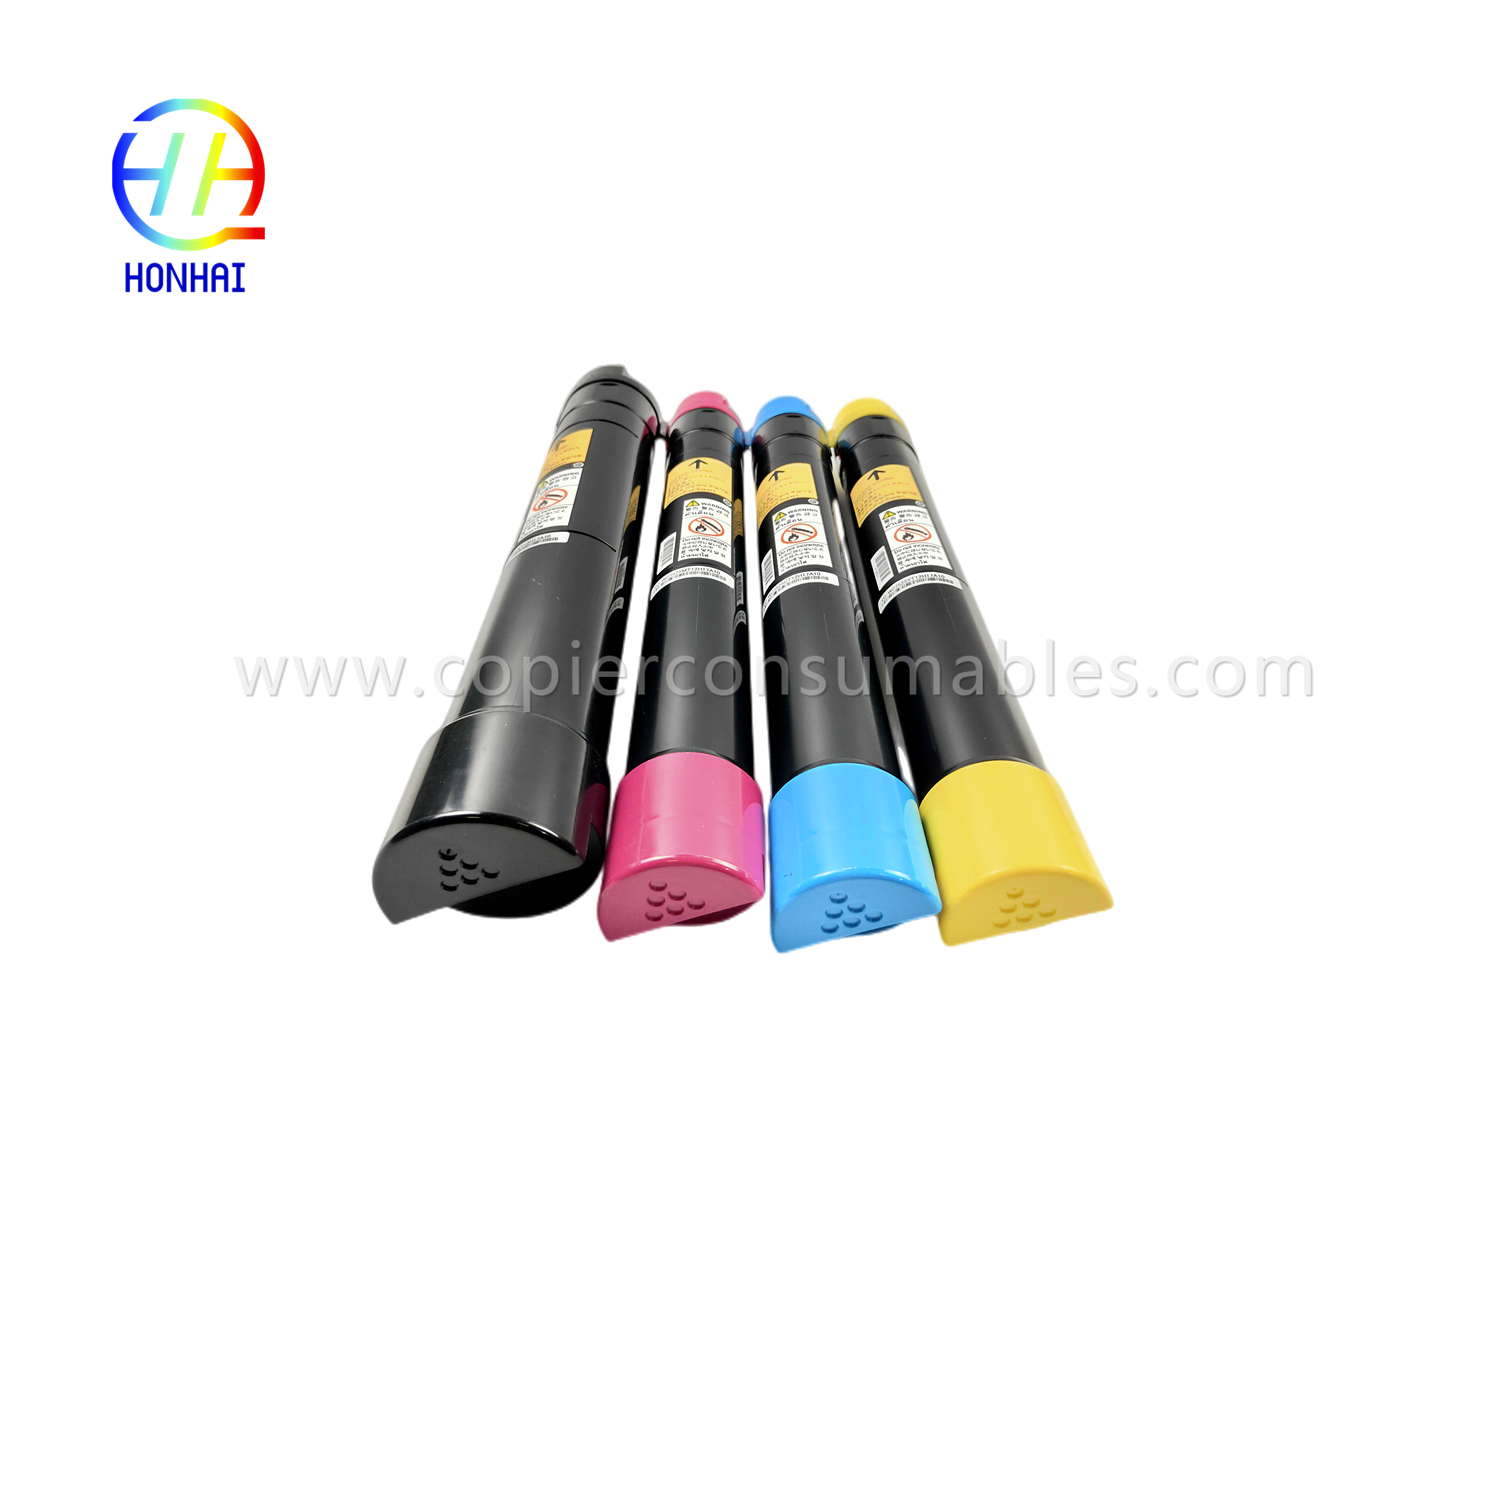 https://www.copierconsumables.com/toner-cartridge-imported-powder-set-bcmy-for-xerox-workcentre-7830-7835-7845-7855-7970-7525-7530-7535-7545-7556-5036r 006r01514-006r01515-006r01516-ngwaahịa/